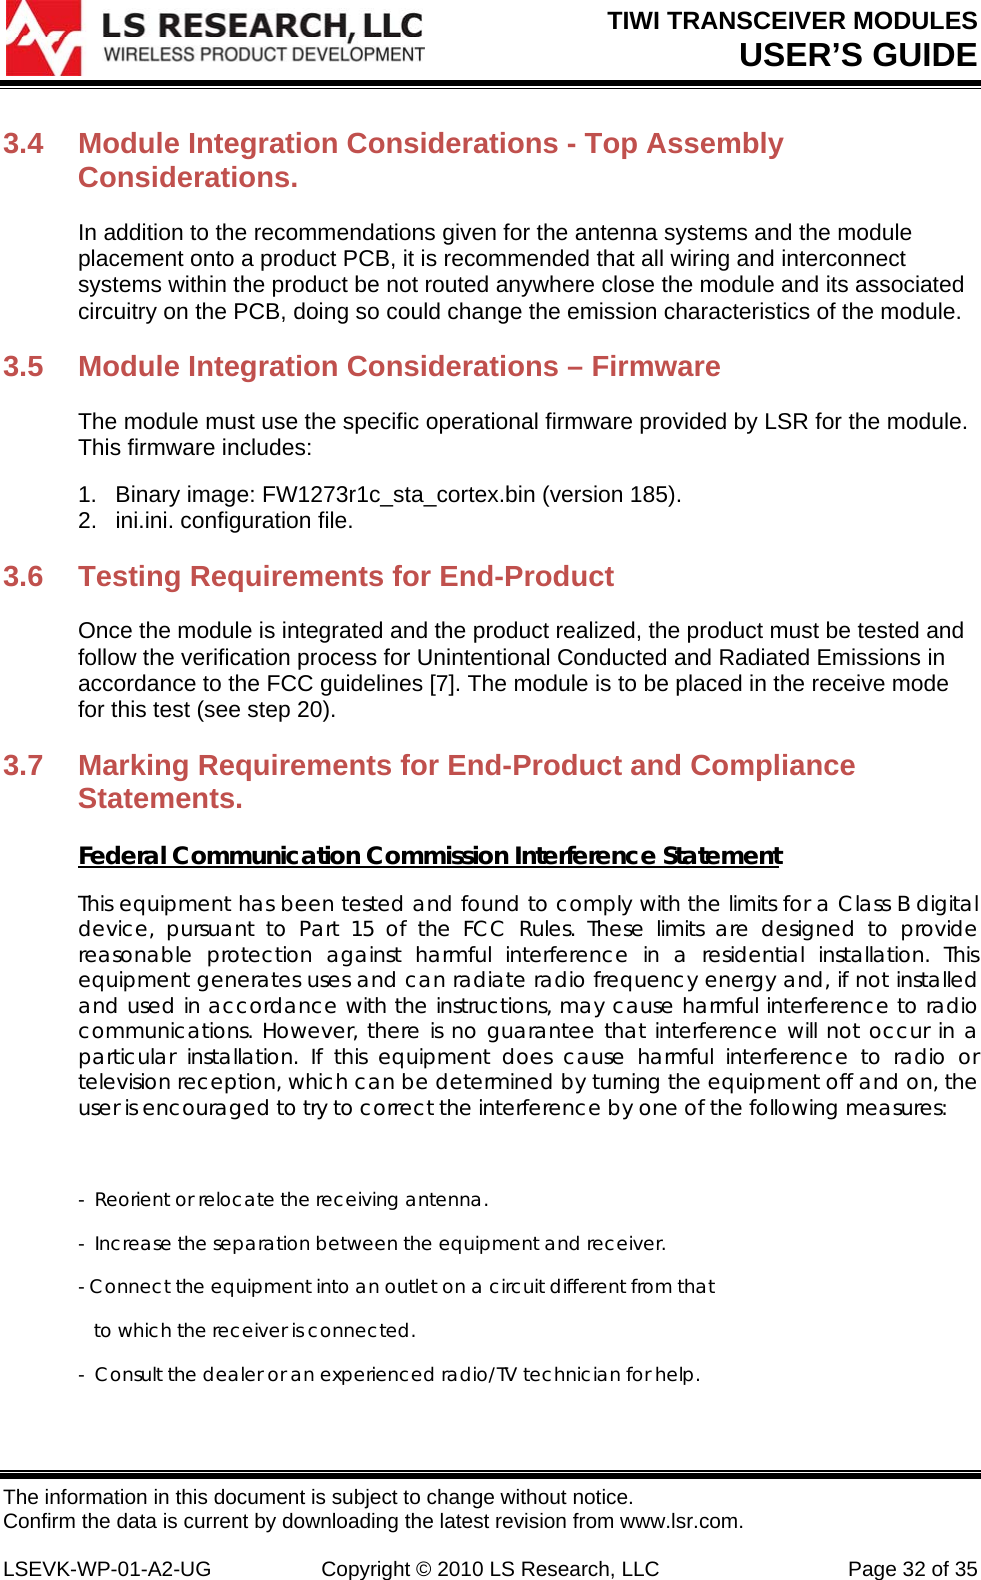 TIWI TRANSCEIVER MODULES USER’S GUIDE The information in this document is subject to change without notice. Confirm the data is current by downloading the latest revision from www.lsr.com.  LSEVK-WP-01-A2-UG  Copyright © 2010 LS Research, LLC  Page 32 of 35 3.4  Module Integration Considerations - Top Assembly Considerations.  In addition to the recommendations given for the antenna systems and the module placement onto a product PCB, it is recommended that all wiring and interconnect systems within the product be not routed anywhere close the module and its associated circuitry on the PCB, doing so could change the emission characteristics of the module.  3.5  Module Integration Considerations – Firmware The module must use the specific operational firmware provided by LSR for the module. This firmware includes: 1.  Binary image: FW1273r1c_sta_cortex.bin (version 185).  2.  ini.ini. configuration file.  3.6  Testing Requirements for End-Product Once the module is integrated and the product realized, the product must be tested and follow the verification process for Unintentional Conducted and Radiated Emissions in accordance to the FCC guidelines [7]. The module is to be placed in the receive mode for this test (see step 20).  3.7  Marking Requirements for End-Product and Compliance Statements.  Federal Communication Commission Interference Statement This equipment has been tested and found to comply with the limits for a Class B digital device, pursuant to Part 15 of the FCC Rules. These limits are designed to provide reasonable protection against harmful interference in a residential installation. This equipment generates uses and can radiate radio frequency energy and, if not installed and used in accordance with the instructions, may cause harmful interference to radio communications. However, there is no guarantee that interference will not occur in a particular installation. If this equipment does cause harmful interference to radio or television reception, which can be determined by turning the equipment off and on, the user is encouraged to try to correct the interference by one of the following measures:  -  Reorient or relocate the receiving antenna. -  Increase the separation between the equipment and receiver. - Connect the equipment into an outlet on a circuit different from that     to which the receiver is connected. -  Consult the dealer or an experienced radio/TV technician for help.  